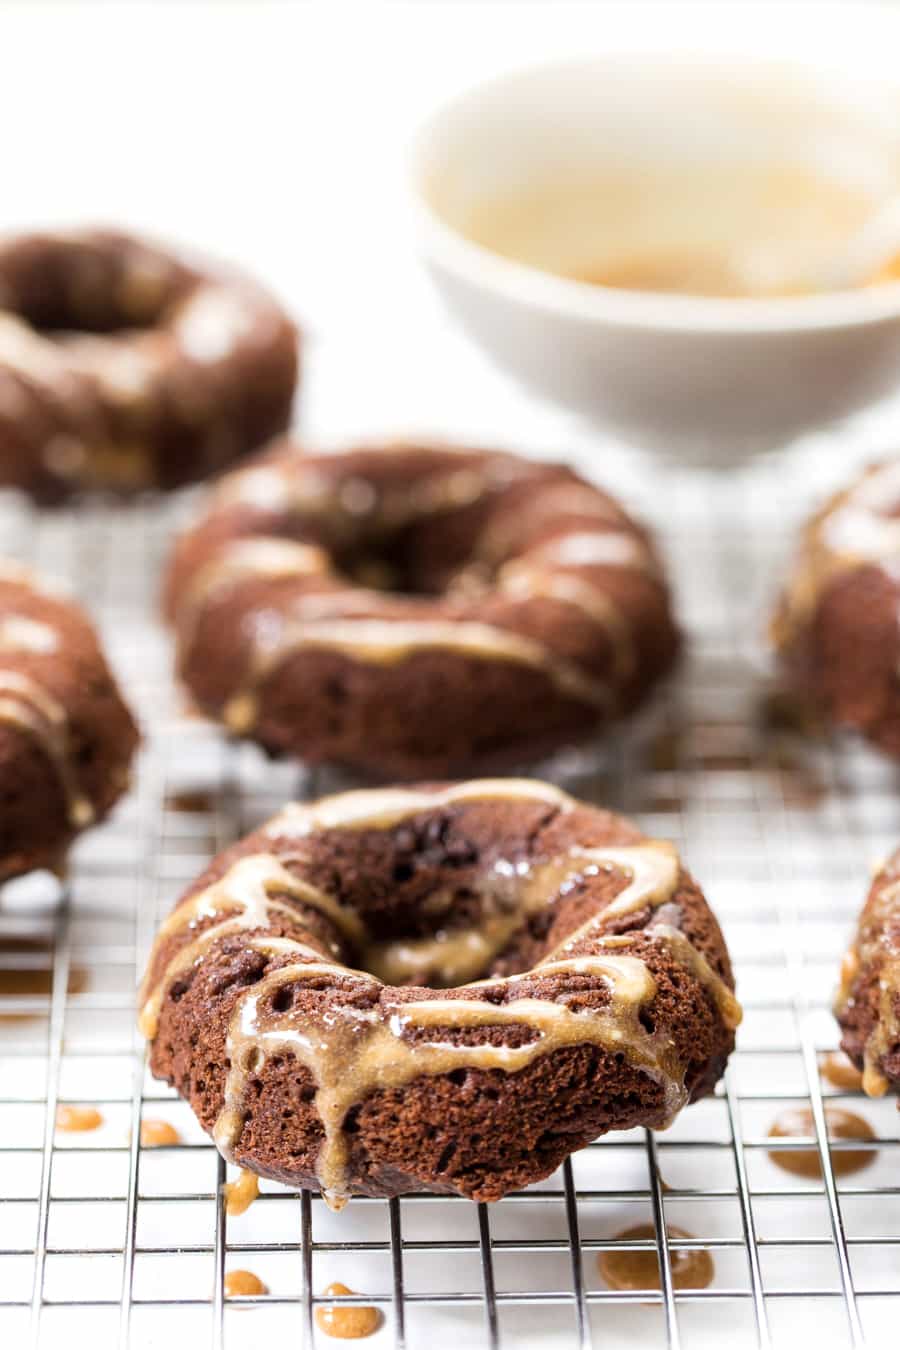 These HEALTHY Banana Chocolate Donuts are made vegan, GF and made in a BLENDER!